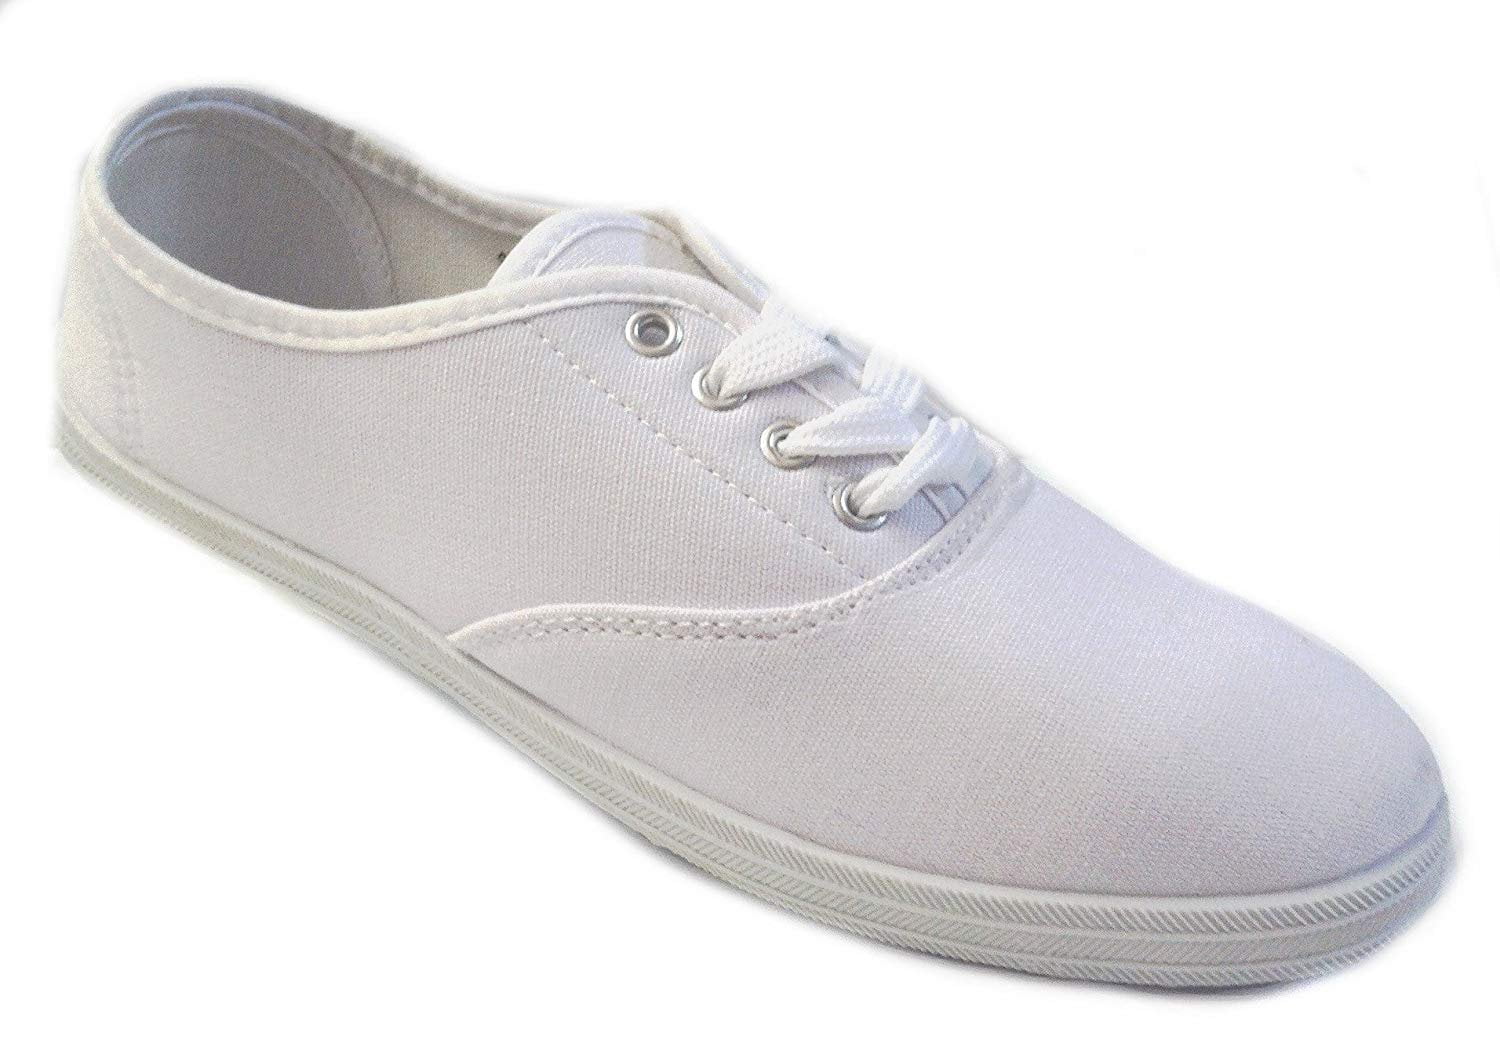 Russell Athletic Oxford Mens Canvas Shoes White Stylish Lace Up Pumps 